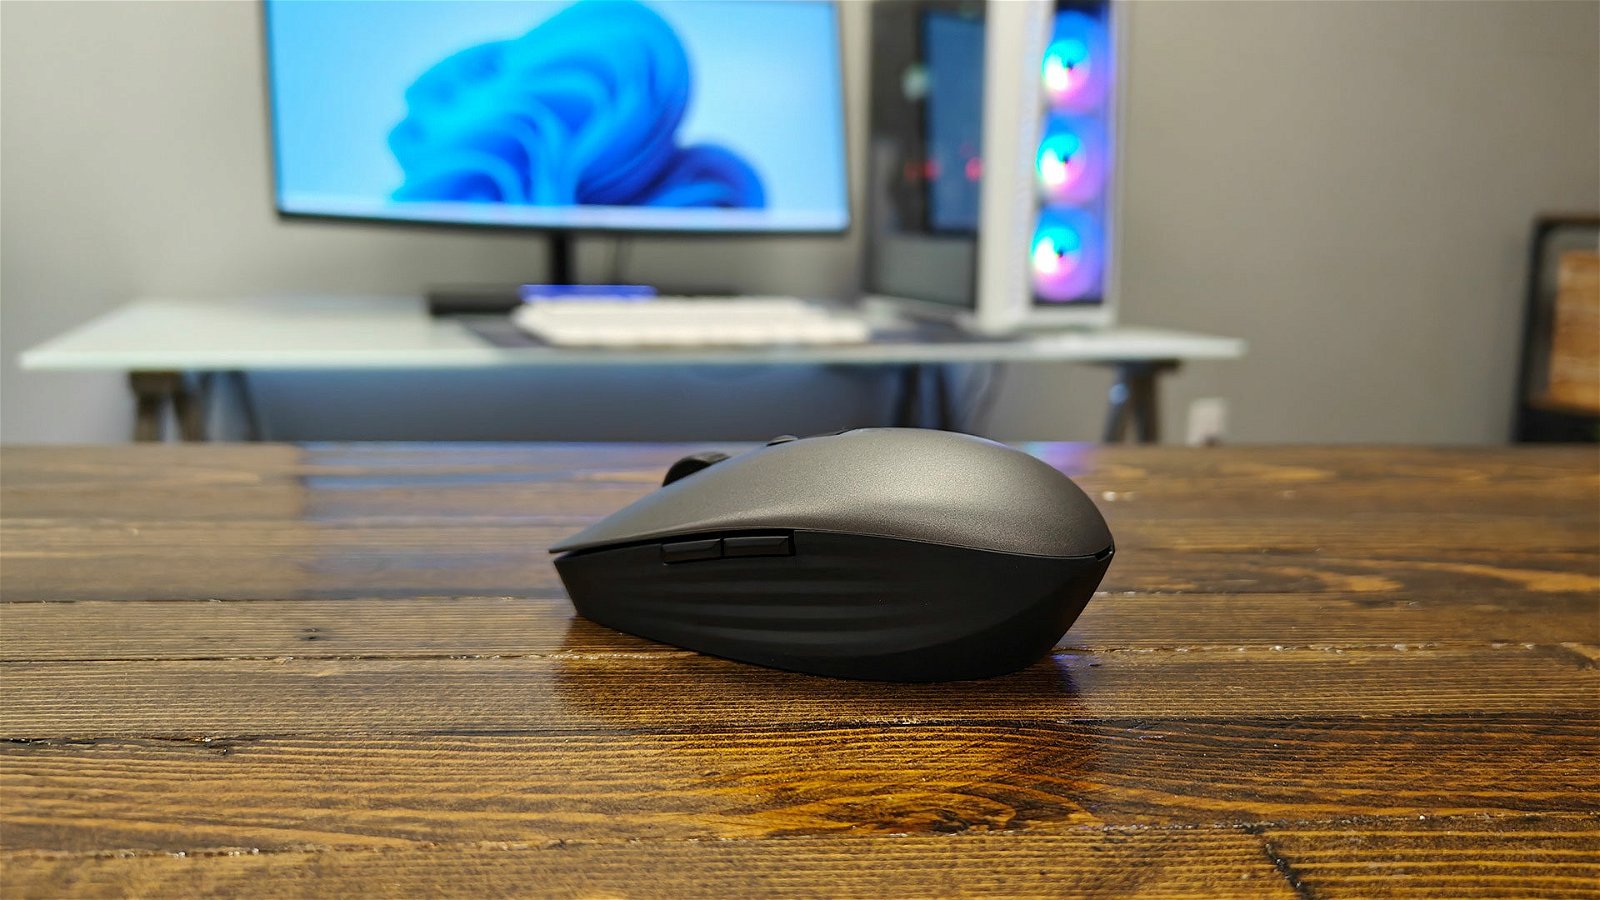 Hp 715 Multi Device Mouse Review 23022202 1